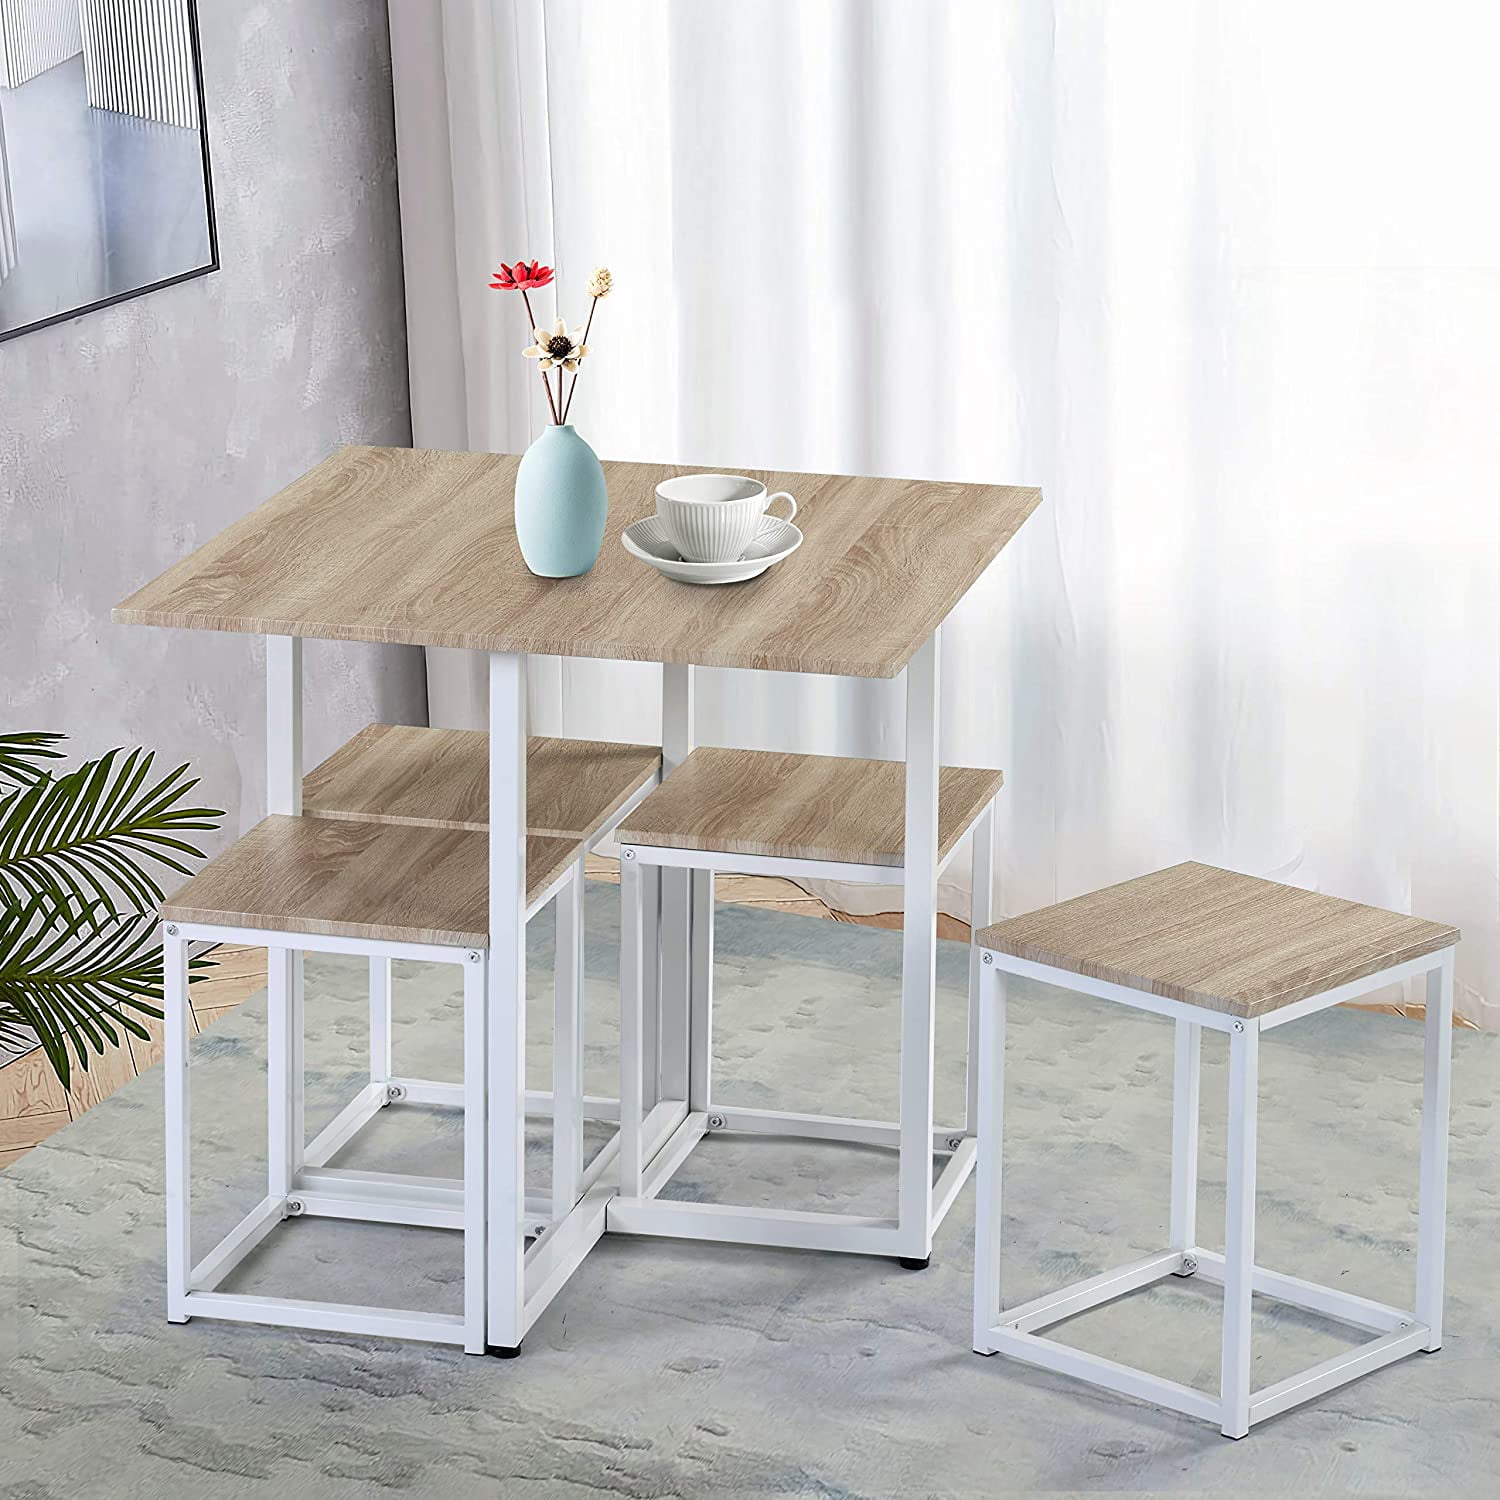 5 Piece Dining Table Set, Dining Set for 4 with Square Stools, Small